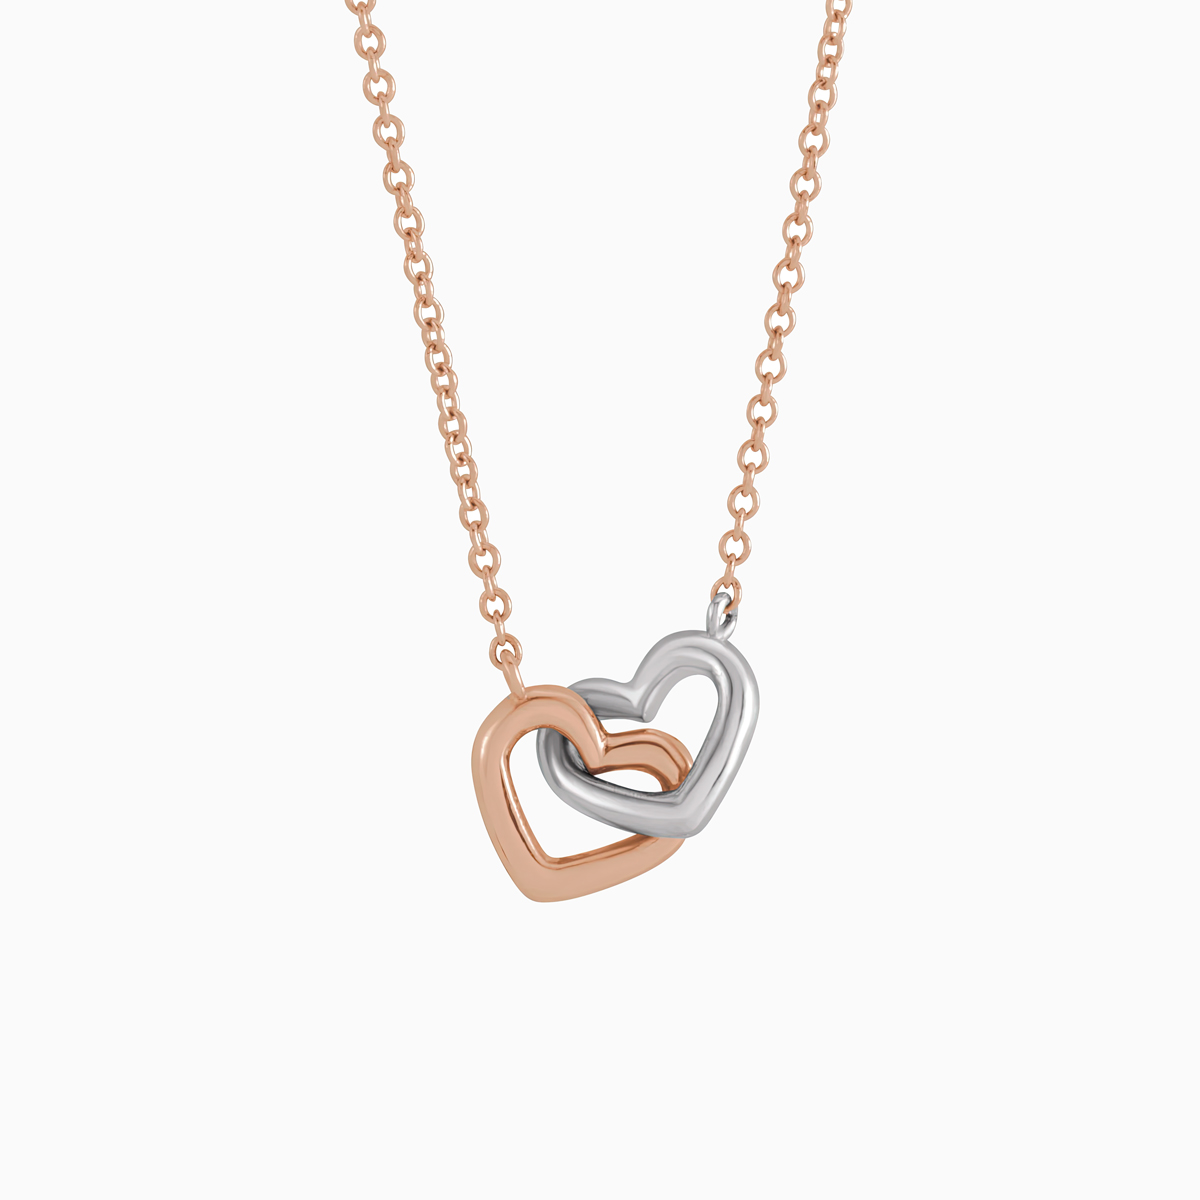 Two Tone Interlocking Heart Necklace, 14k Rose, and White Gold